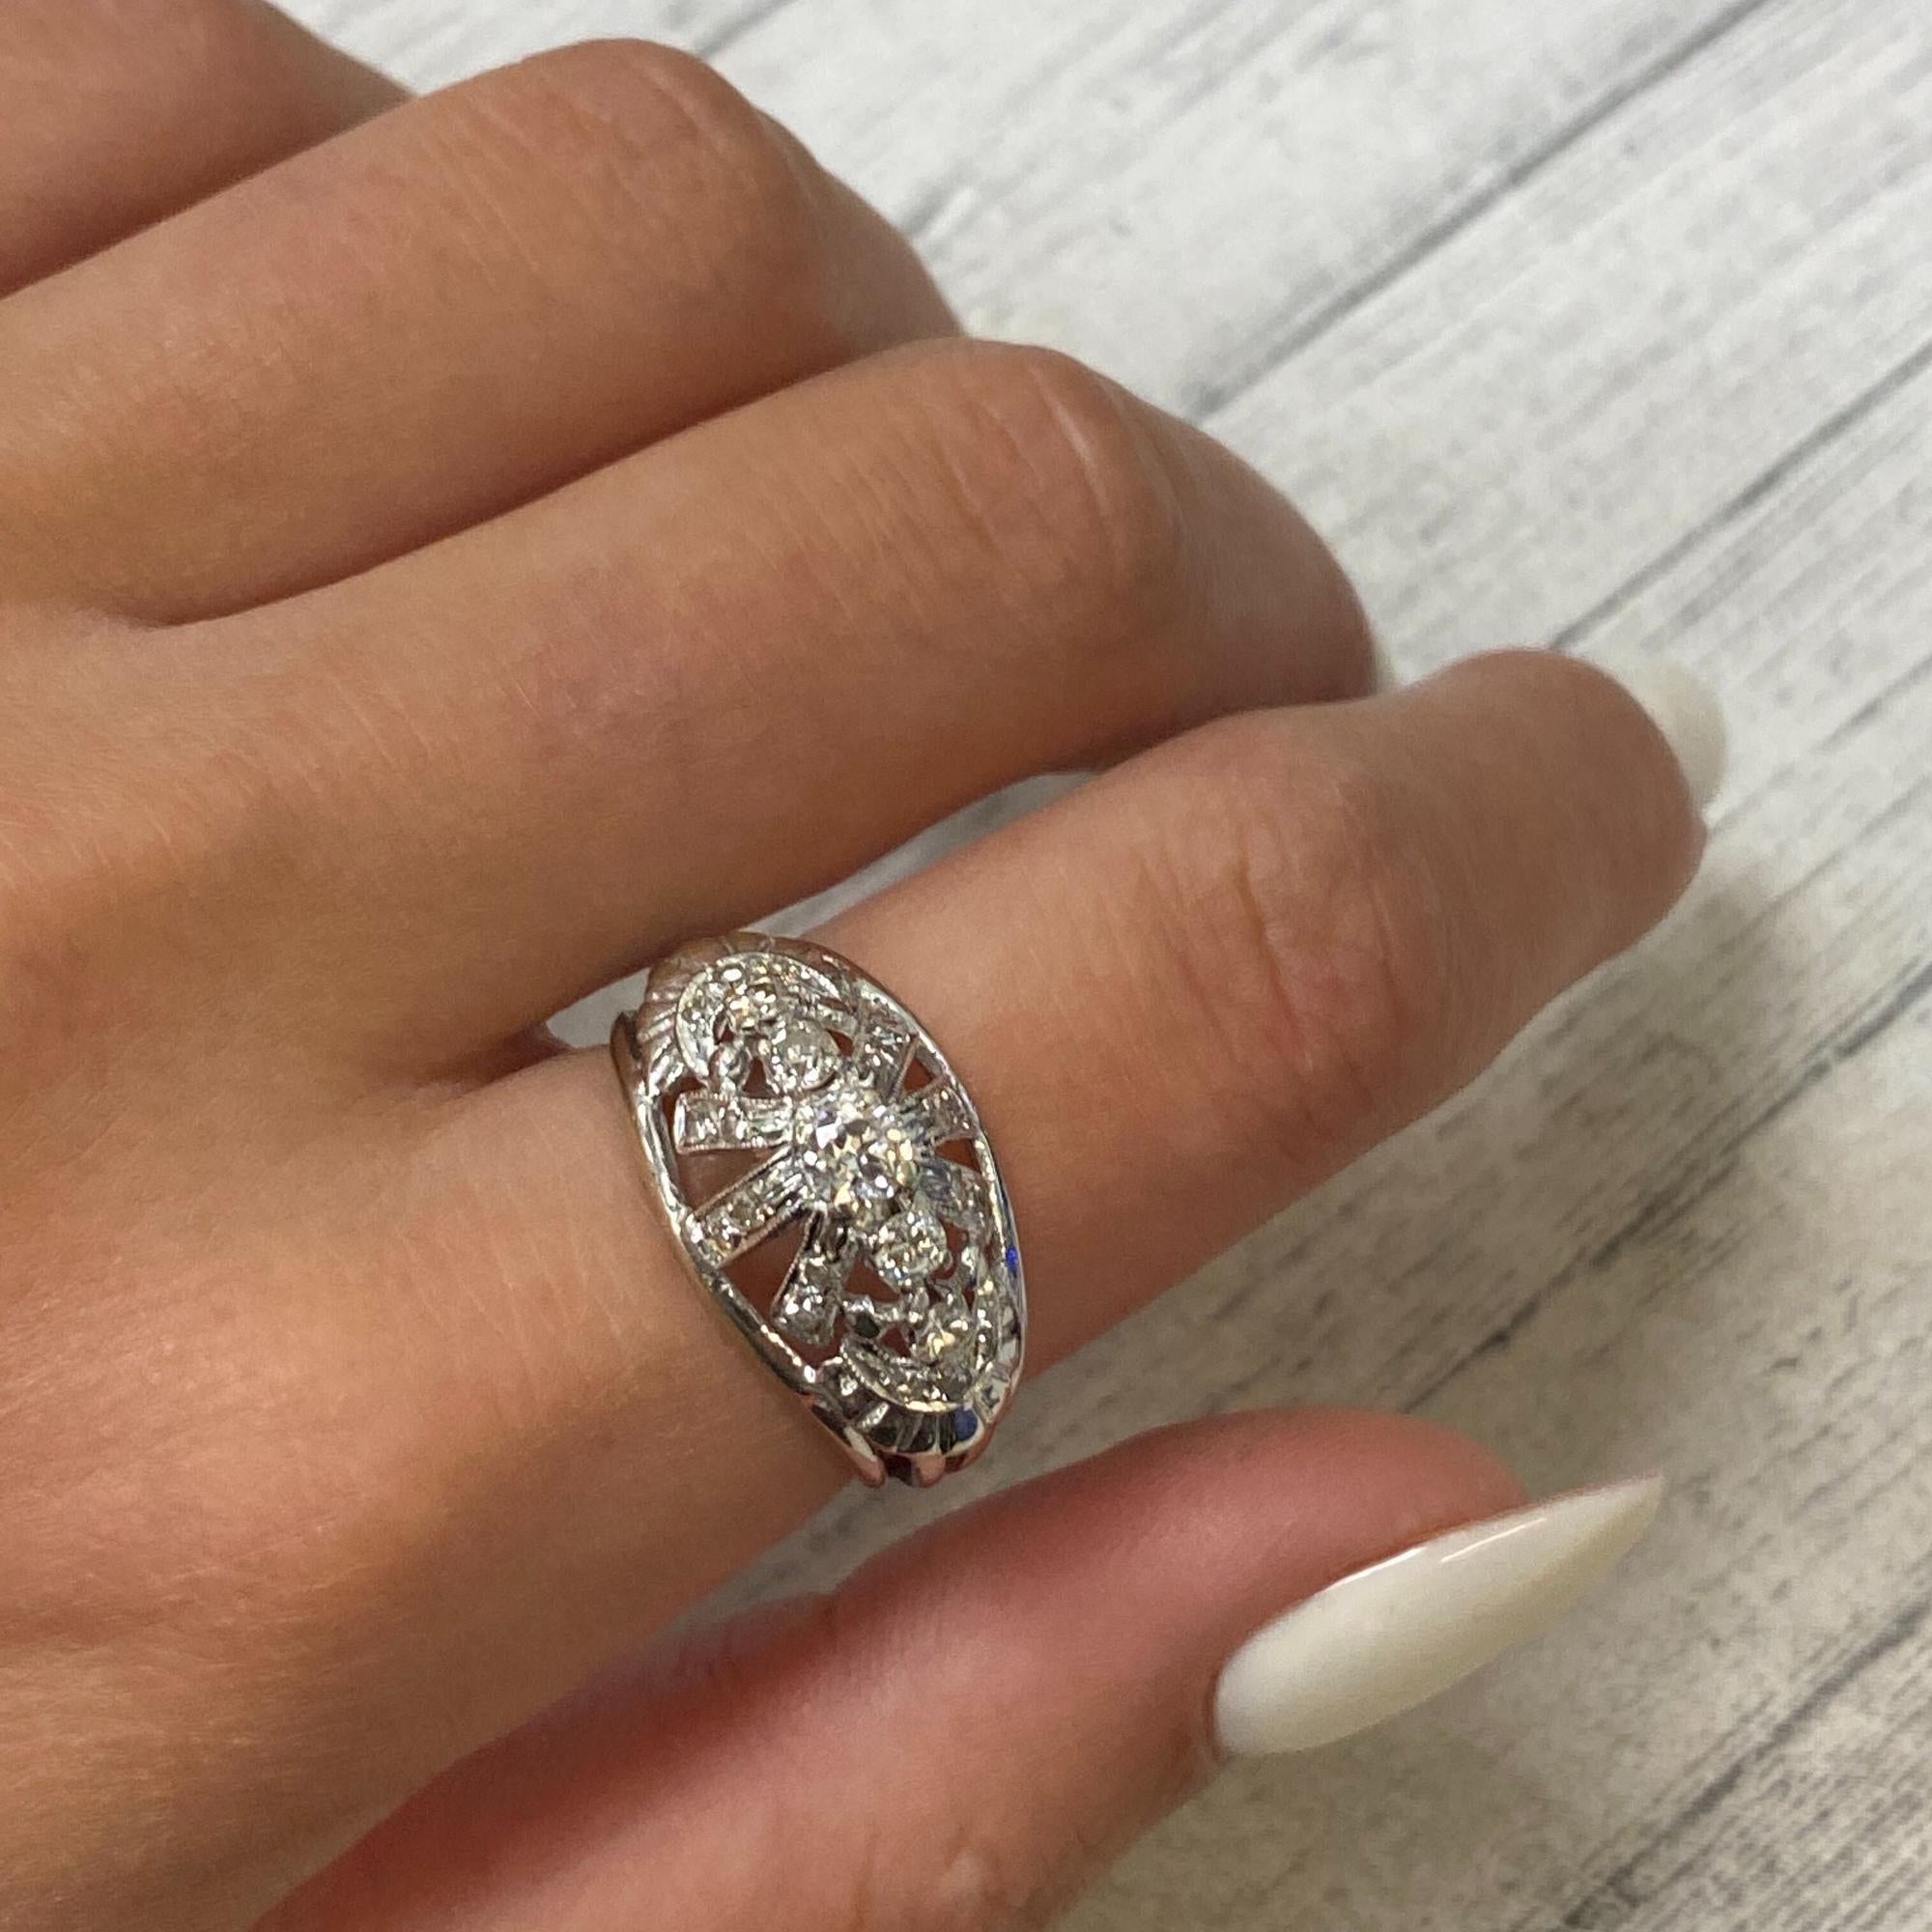 Women's Vintage Dome Diamond Cocktail Ring 14K White Gold 0.36Cttw For Sale